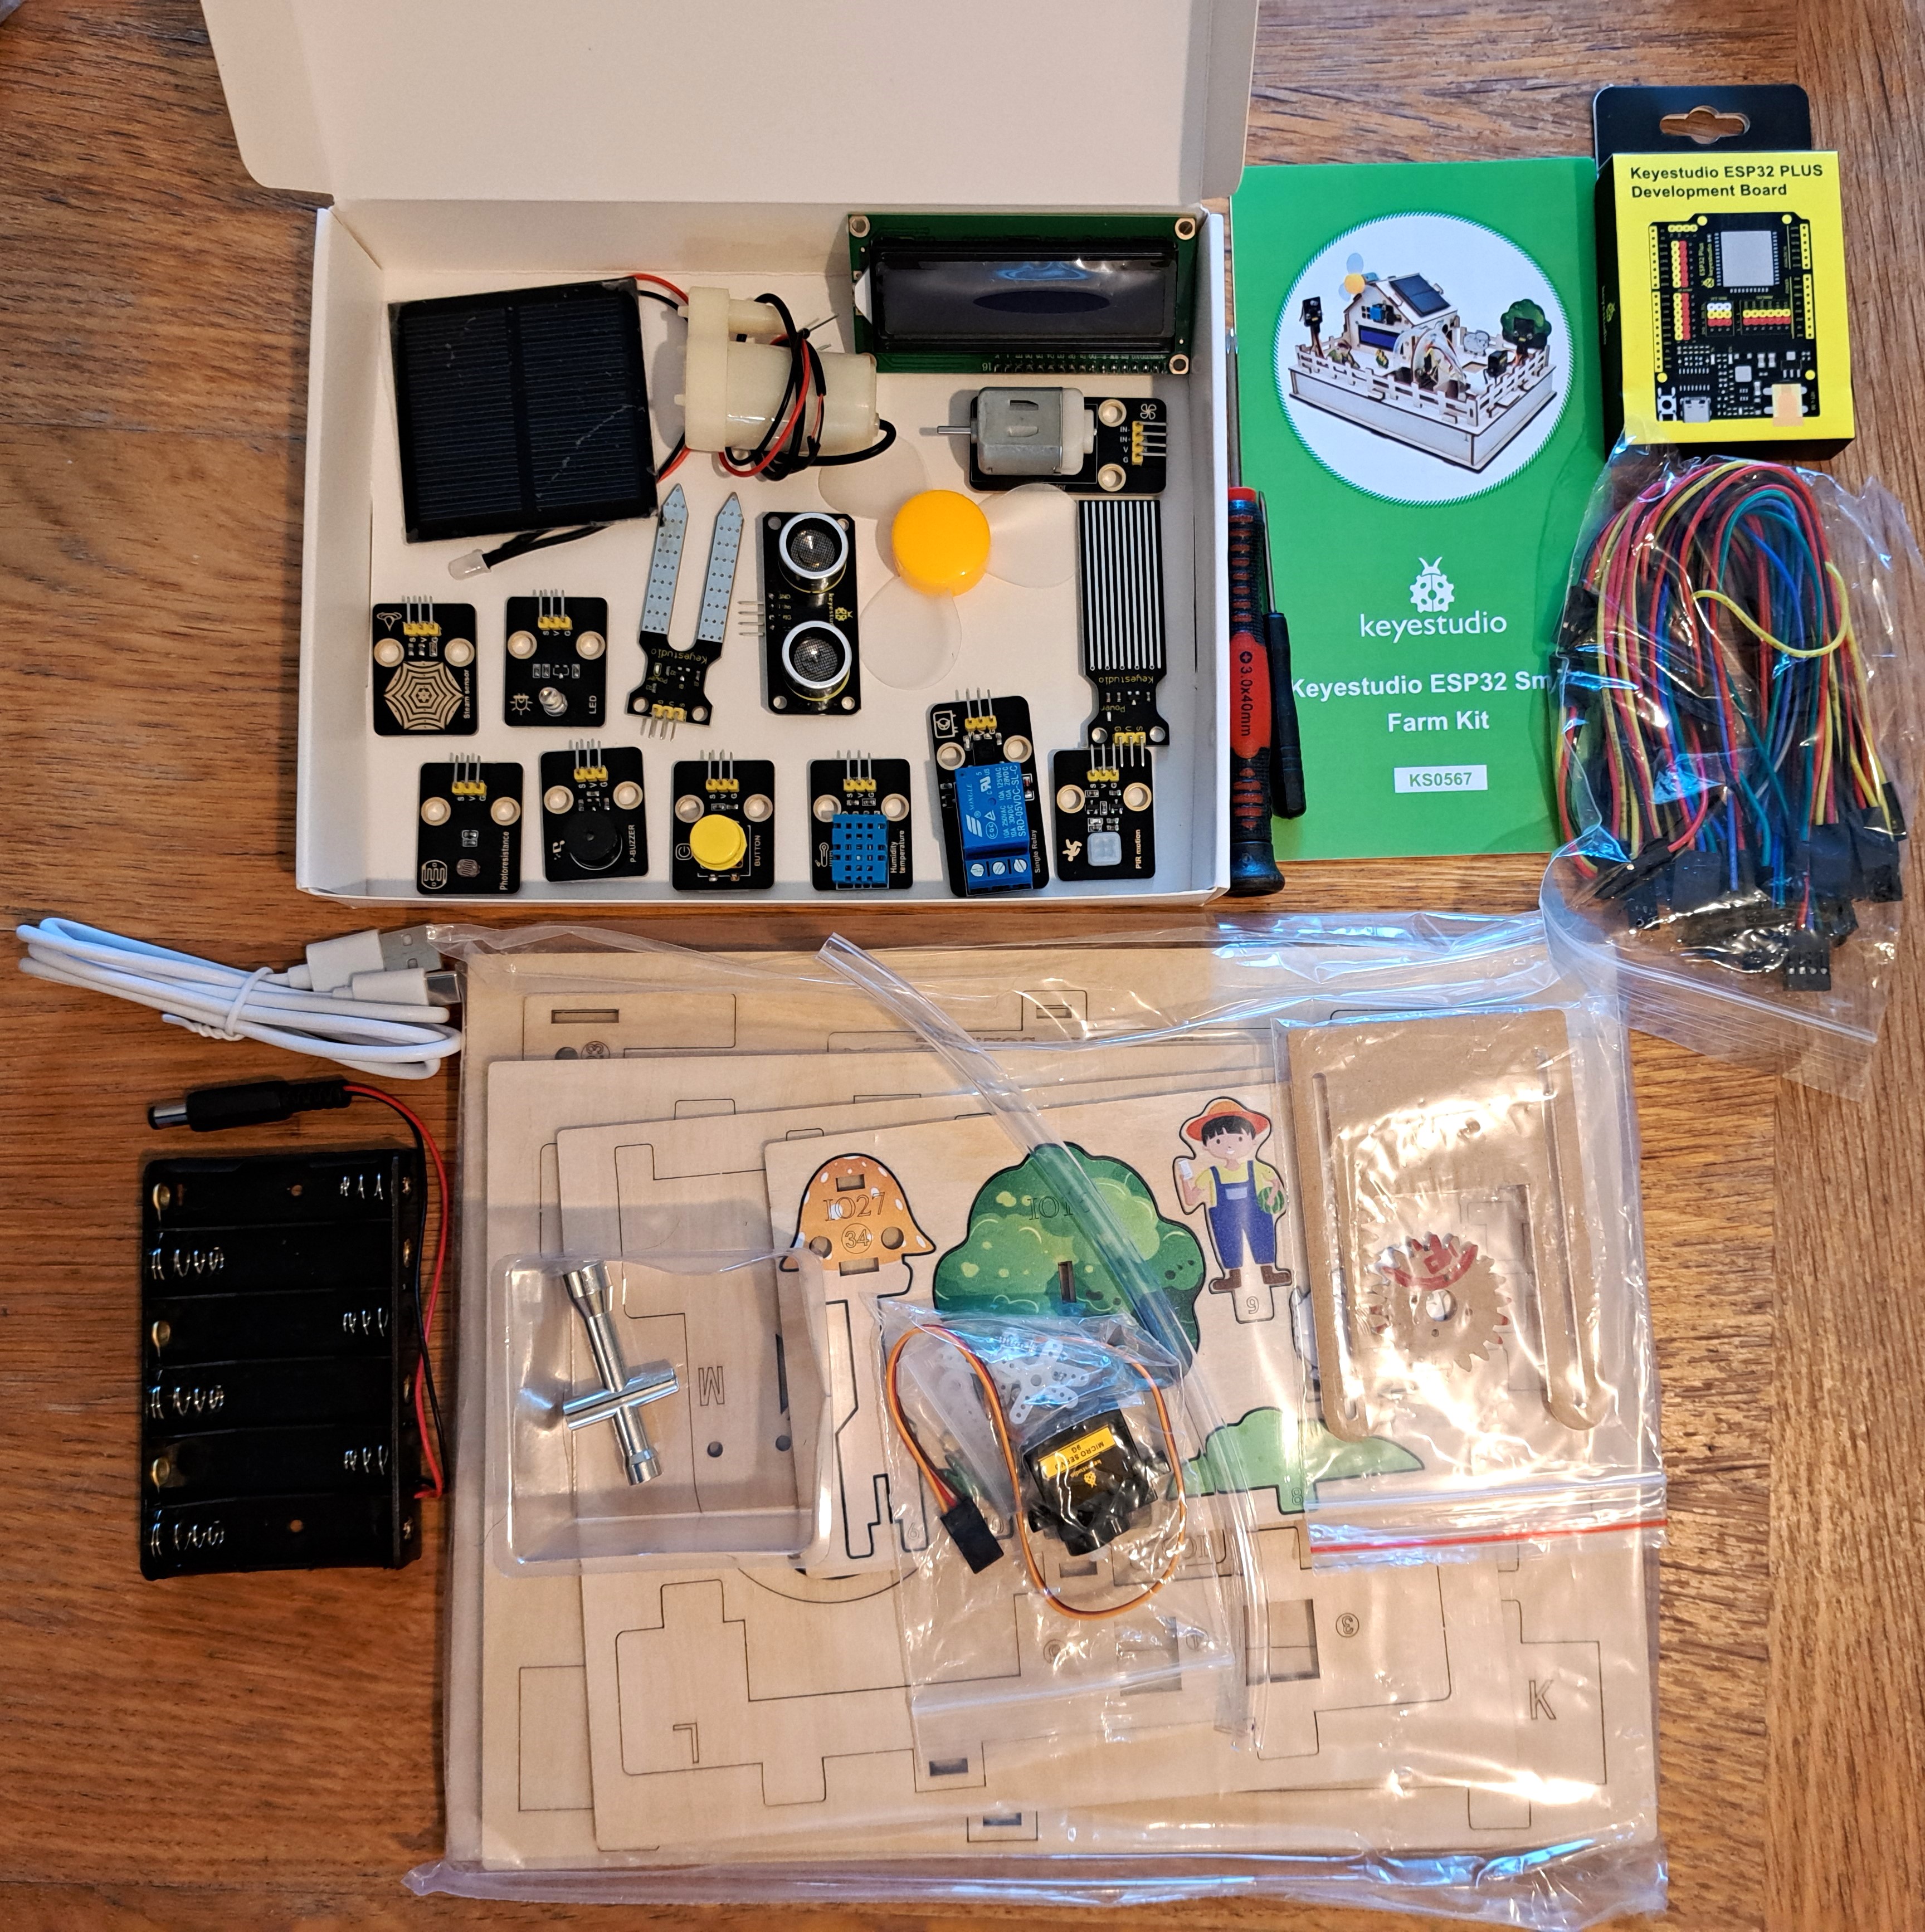 Contents of Box